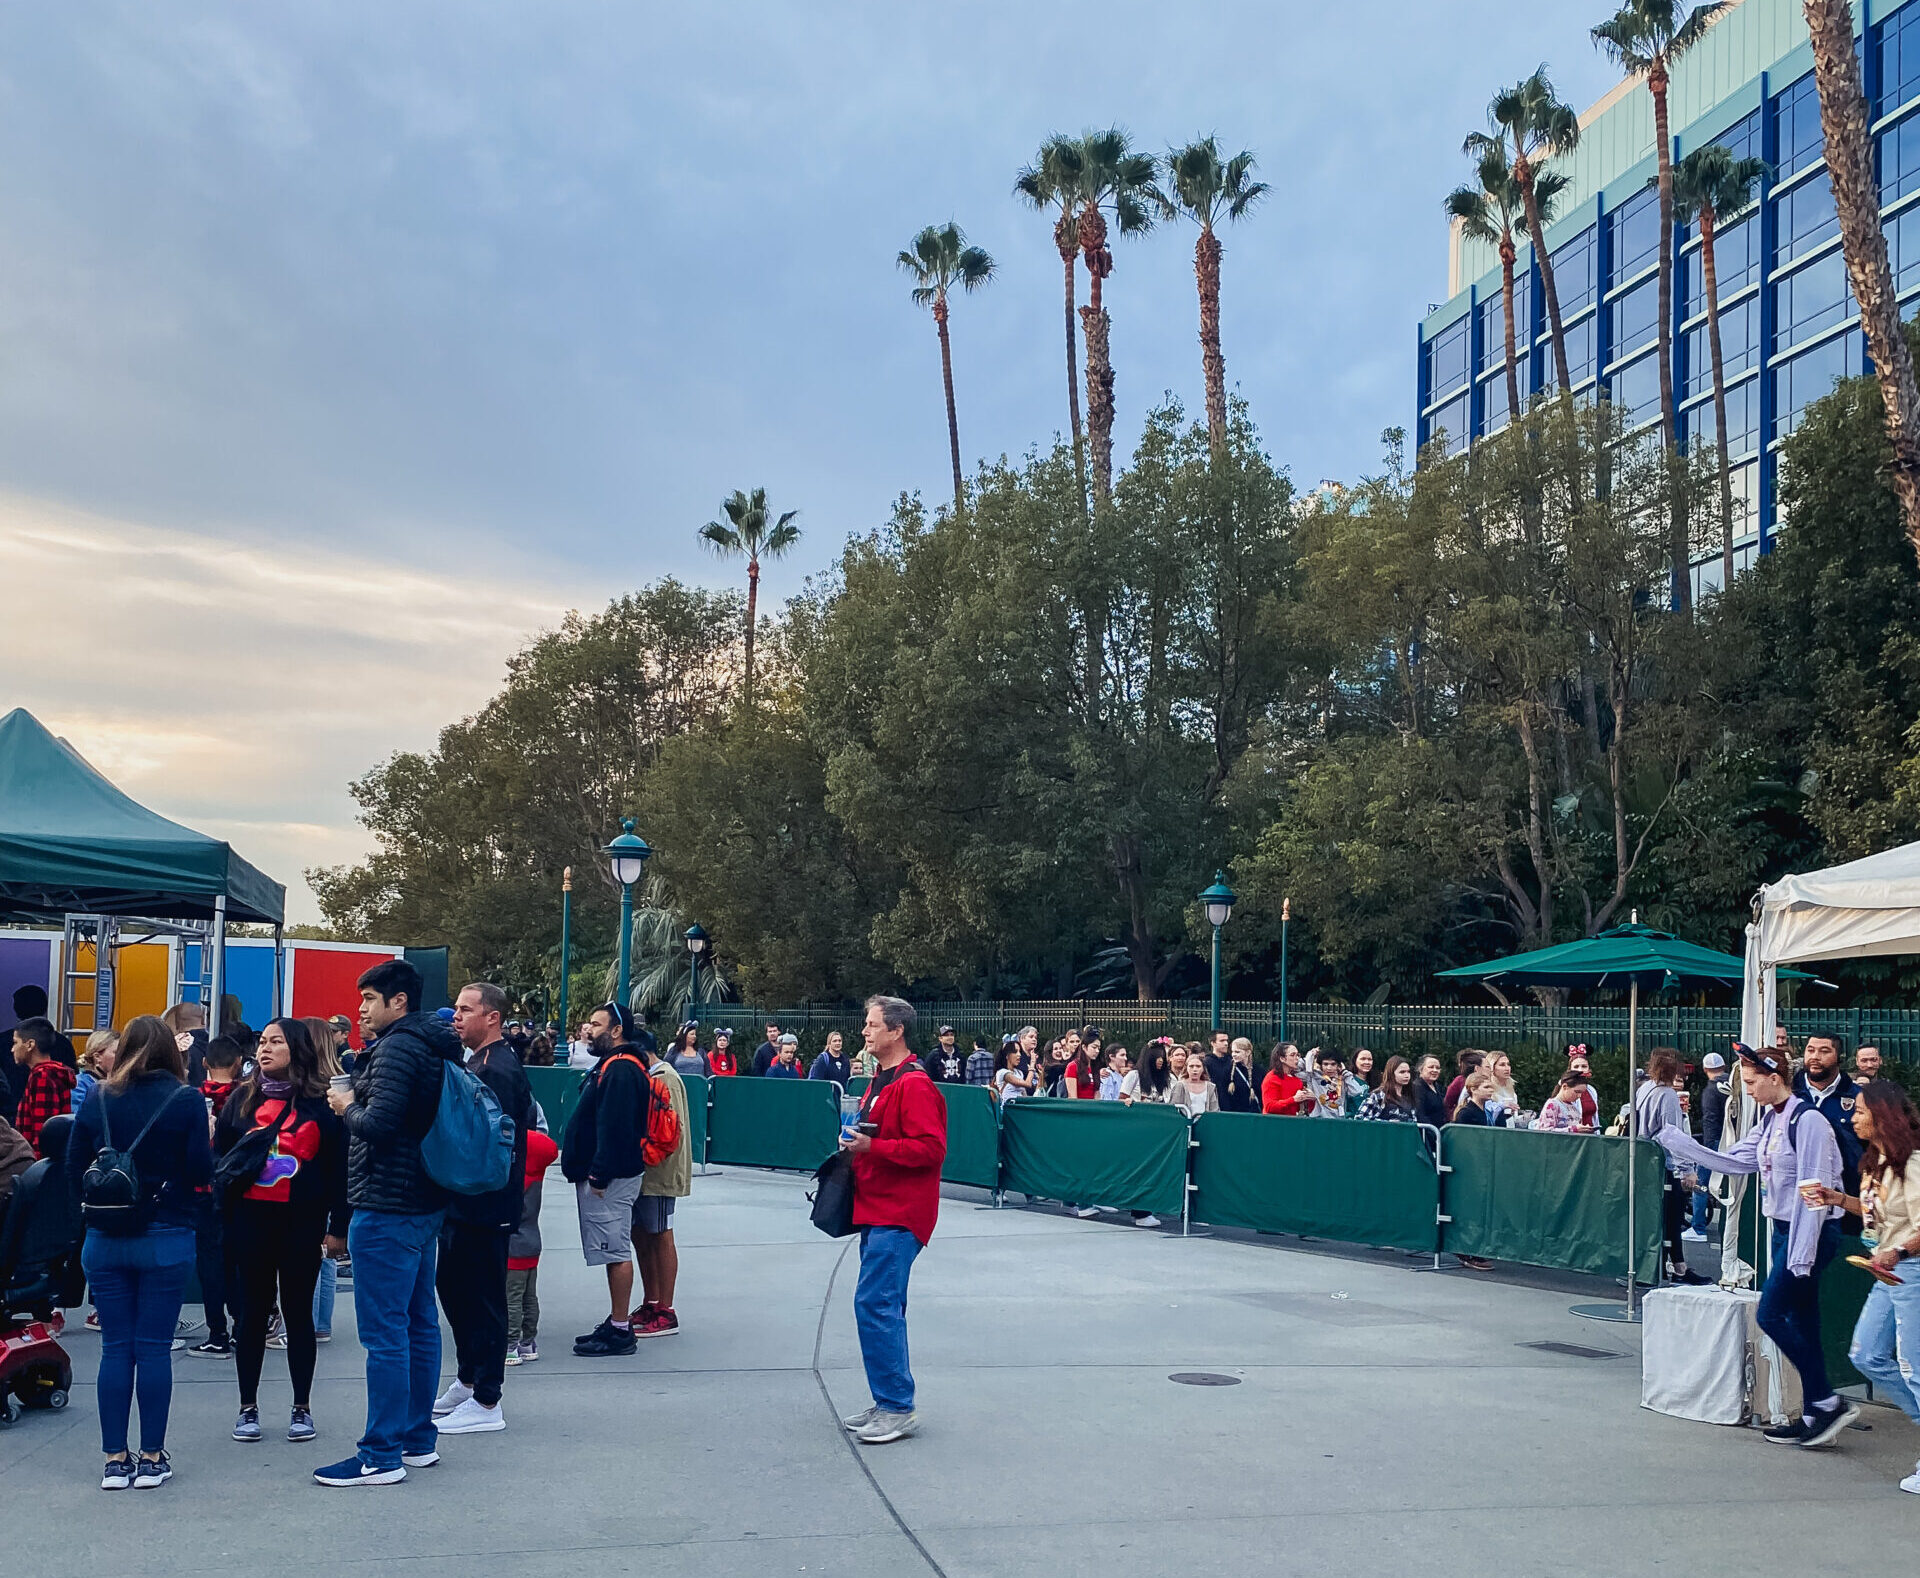 Downtown Disney security during Early Entry for Disneyland Hotel guests.